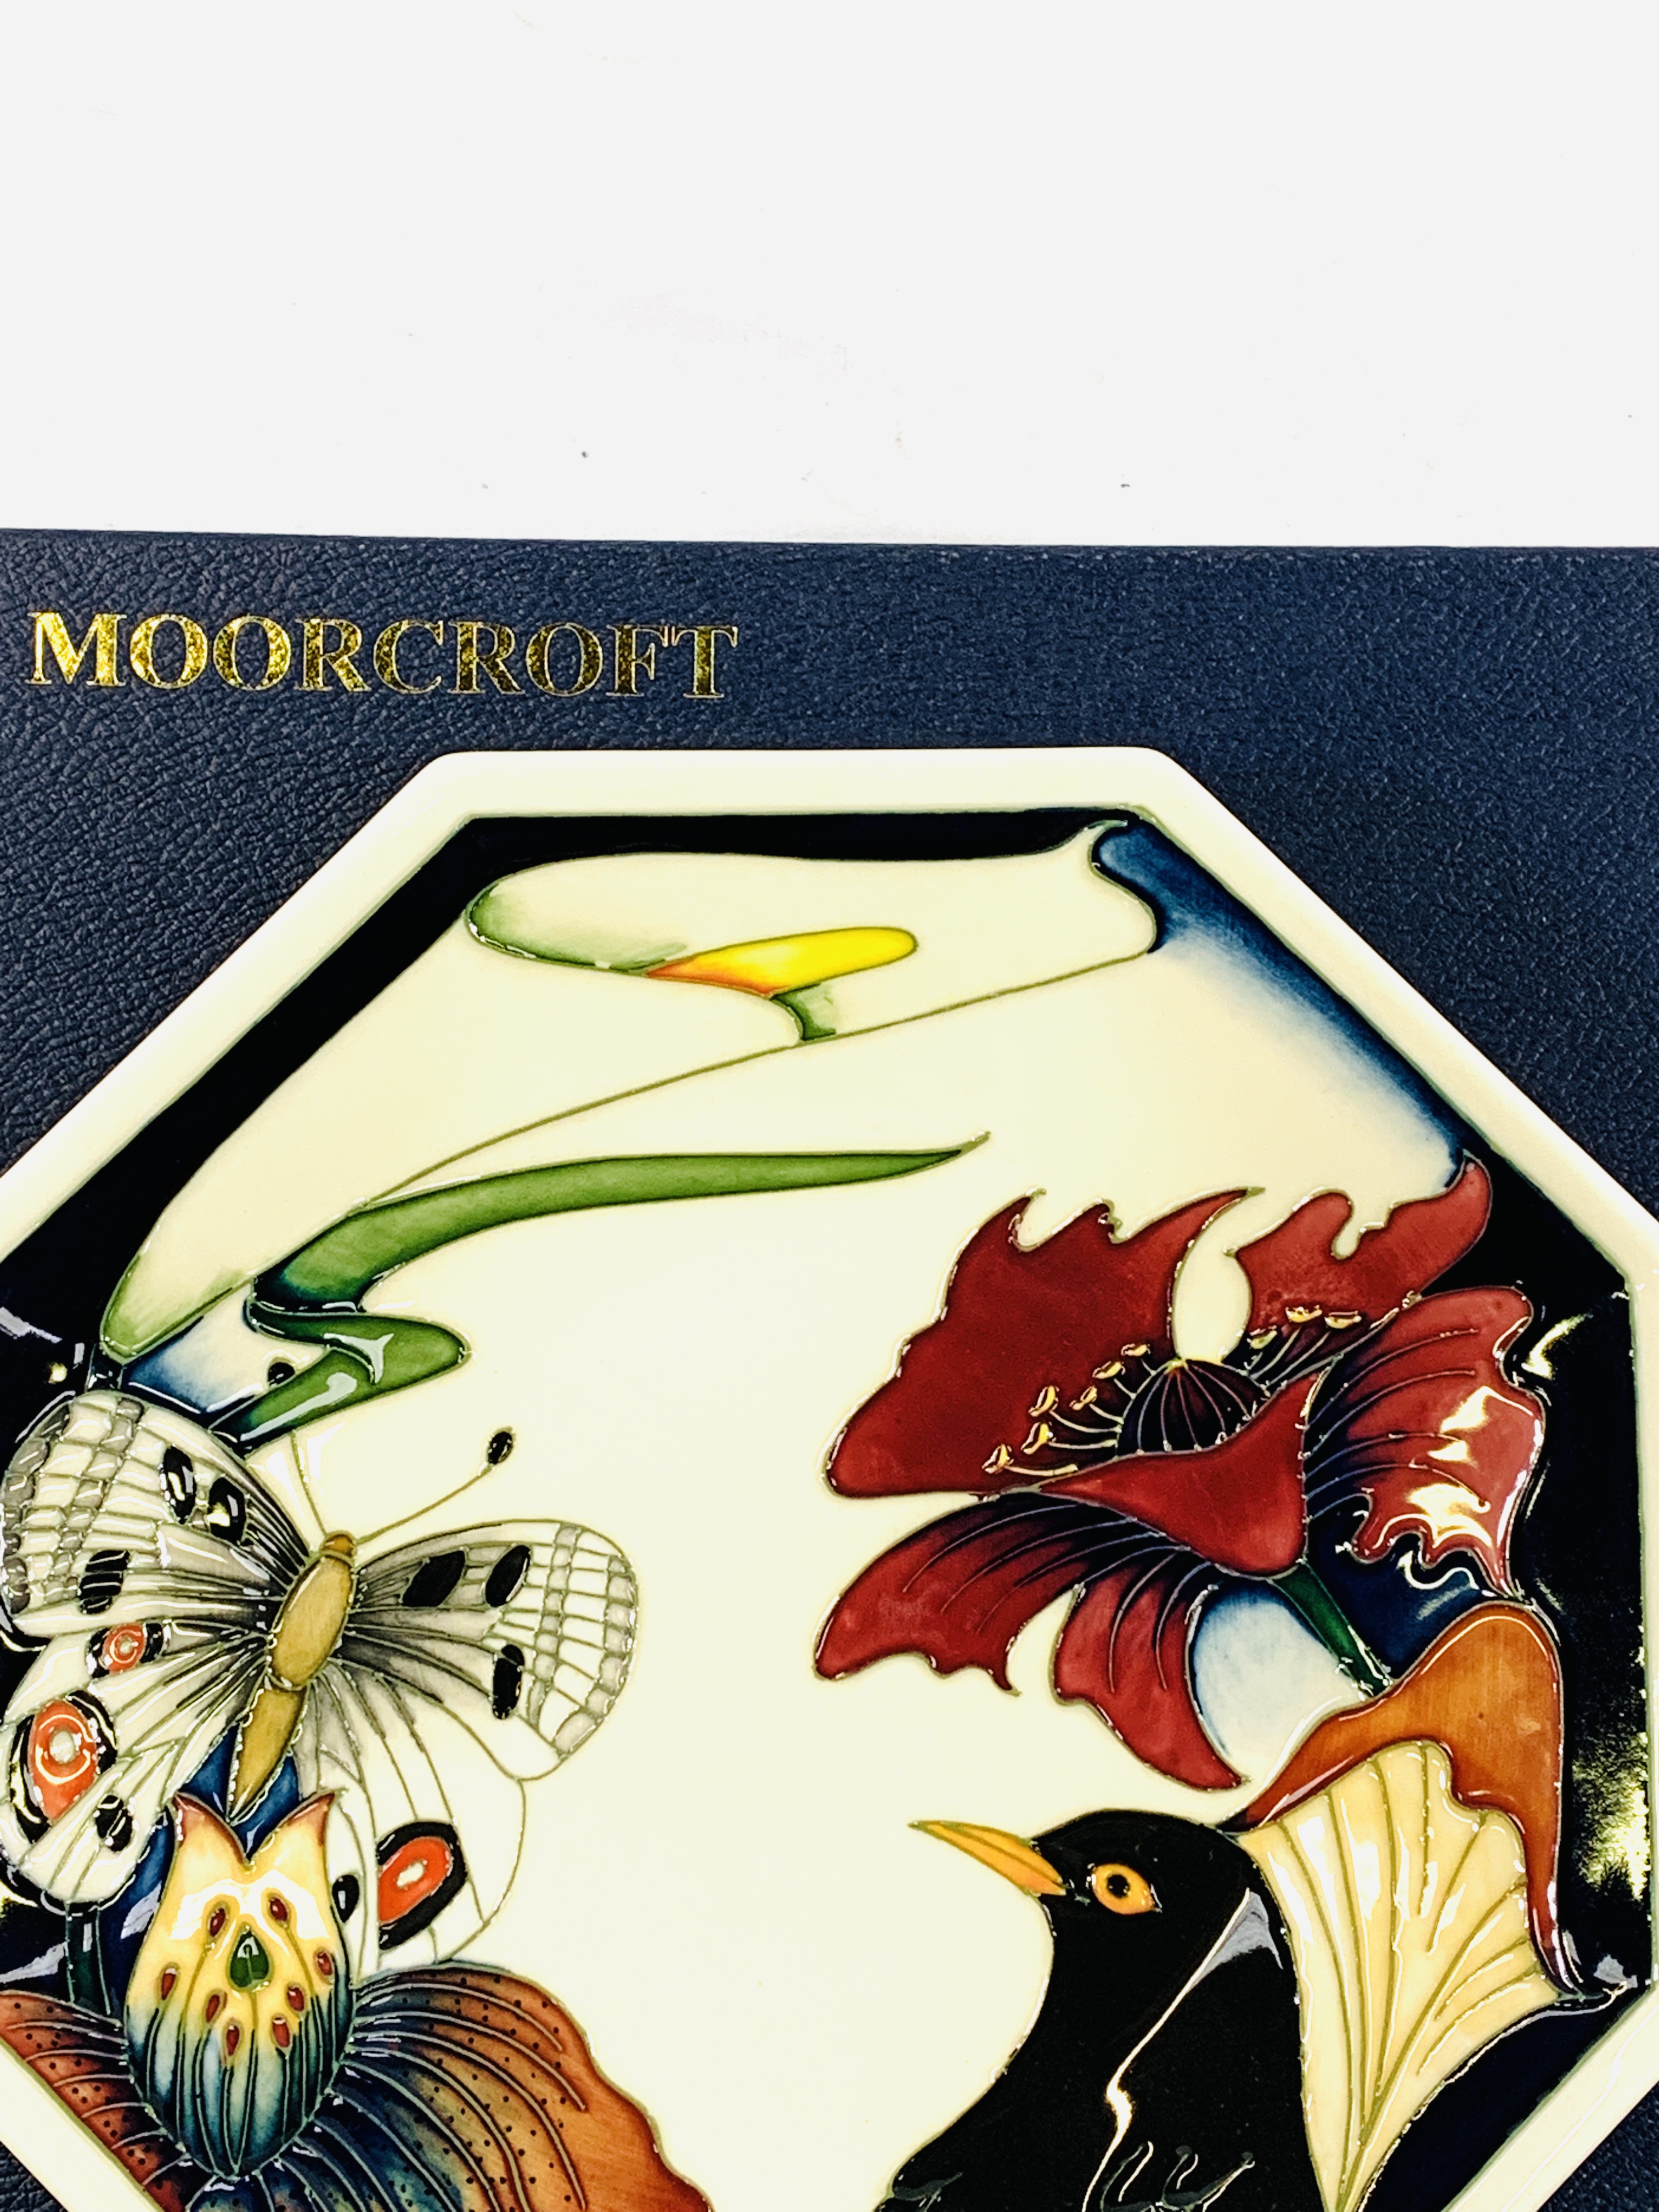 Boxed Moorcroft plate - Image 3 of 3